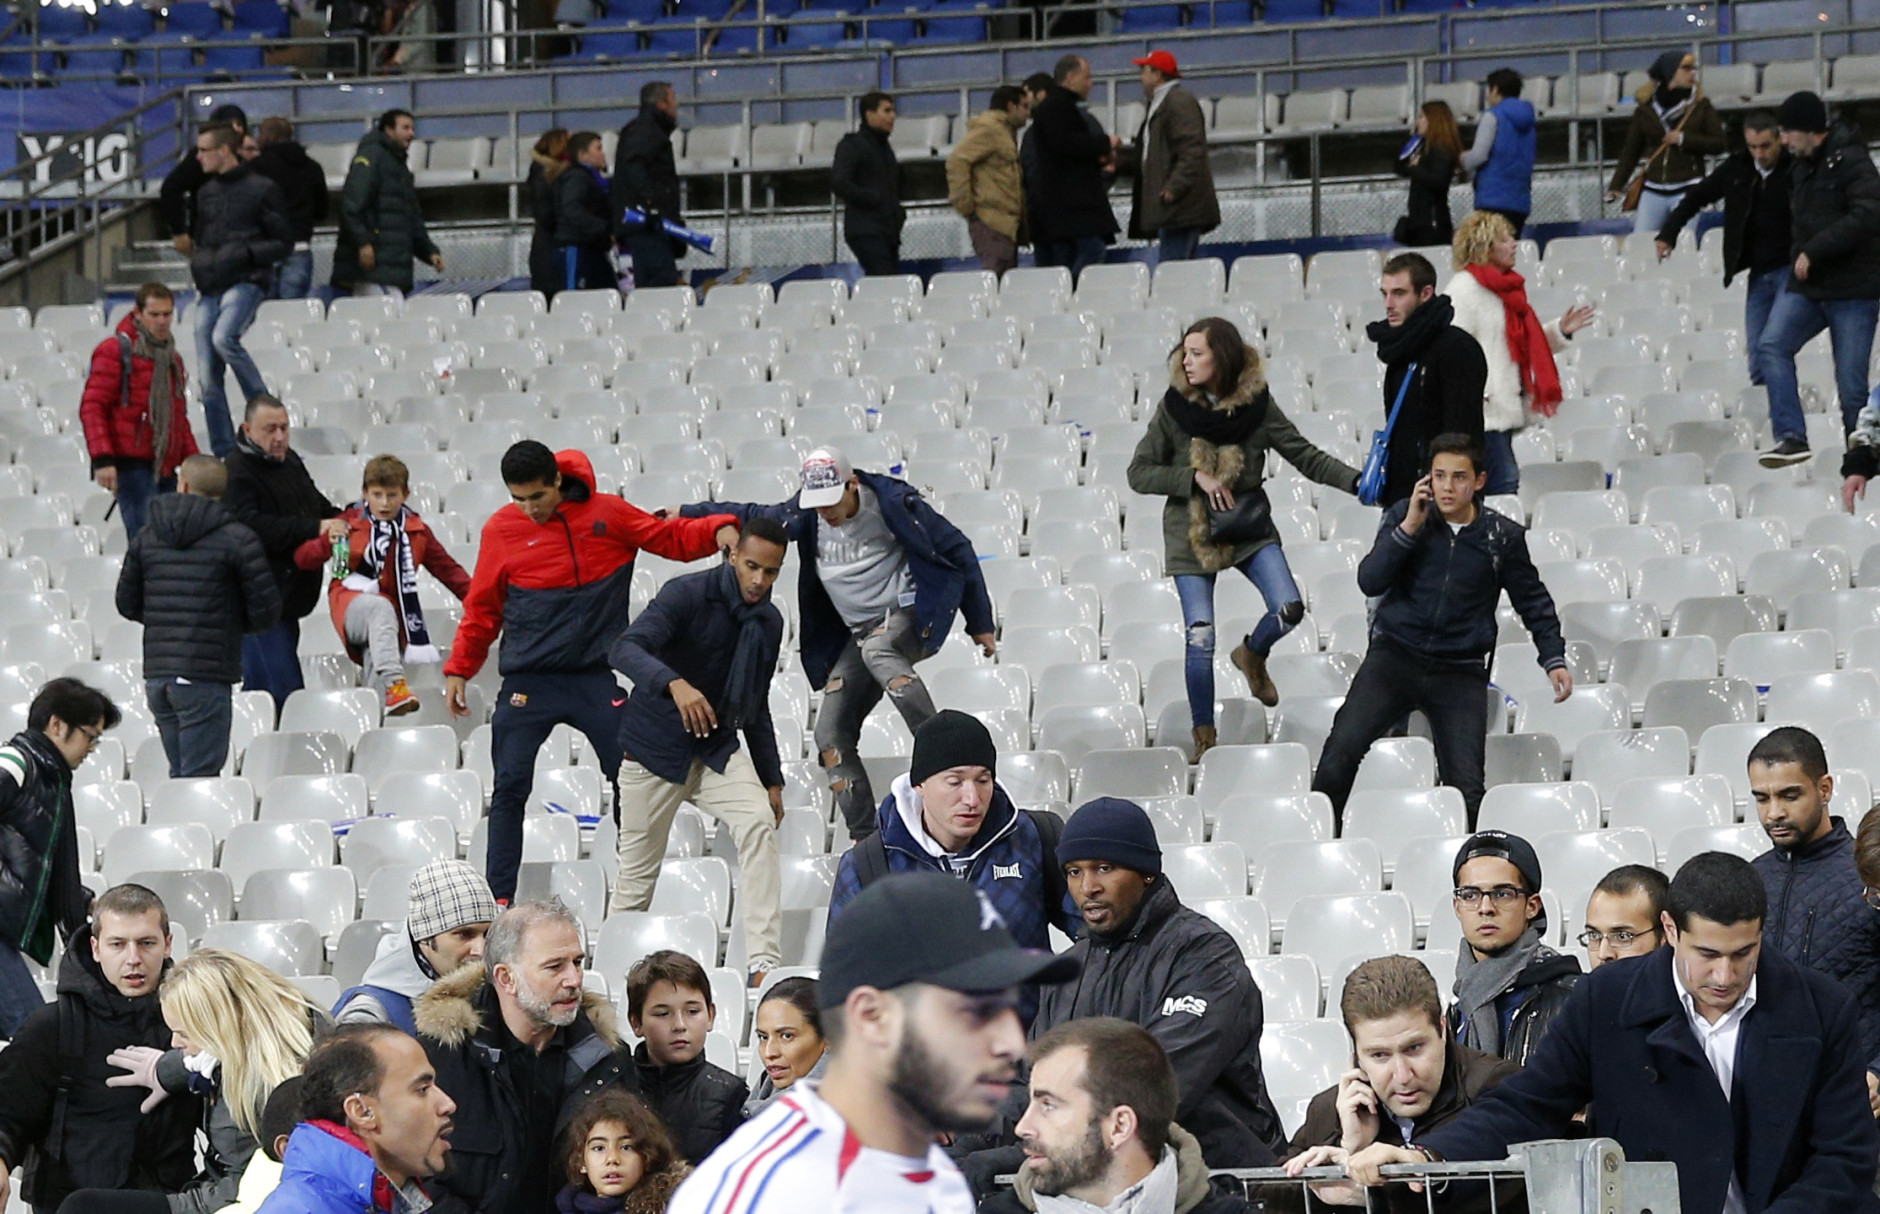 Soccer fans leave the Stade de France stadium after an international friendly soccer match in Saint Denis, outside Paris, Friday, Nov. 13, 2015. An explosion occured outside the stadium. Several dozen people were killed in a series of unprecedented attacks around Paris on Friday, French President Francois Hollande said, announcing that he was closing the country's borders and declaring a state of emergency. (AP Photo/Christophe Ena)